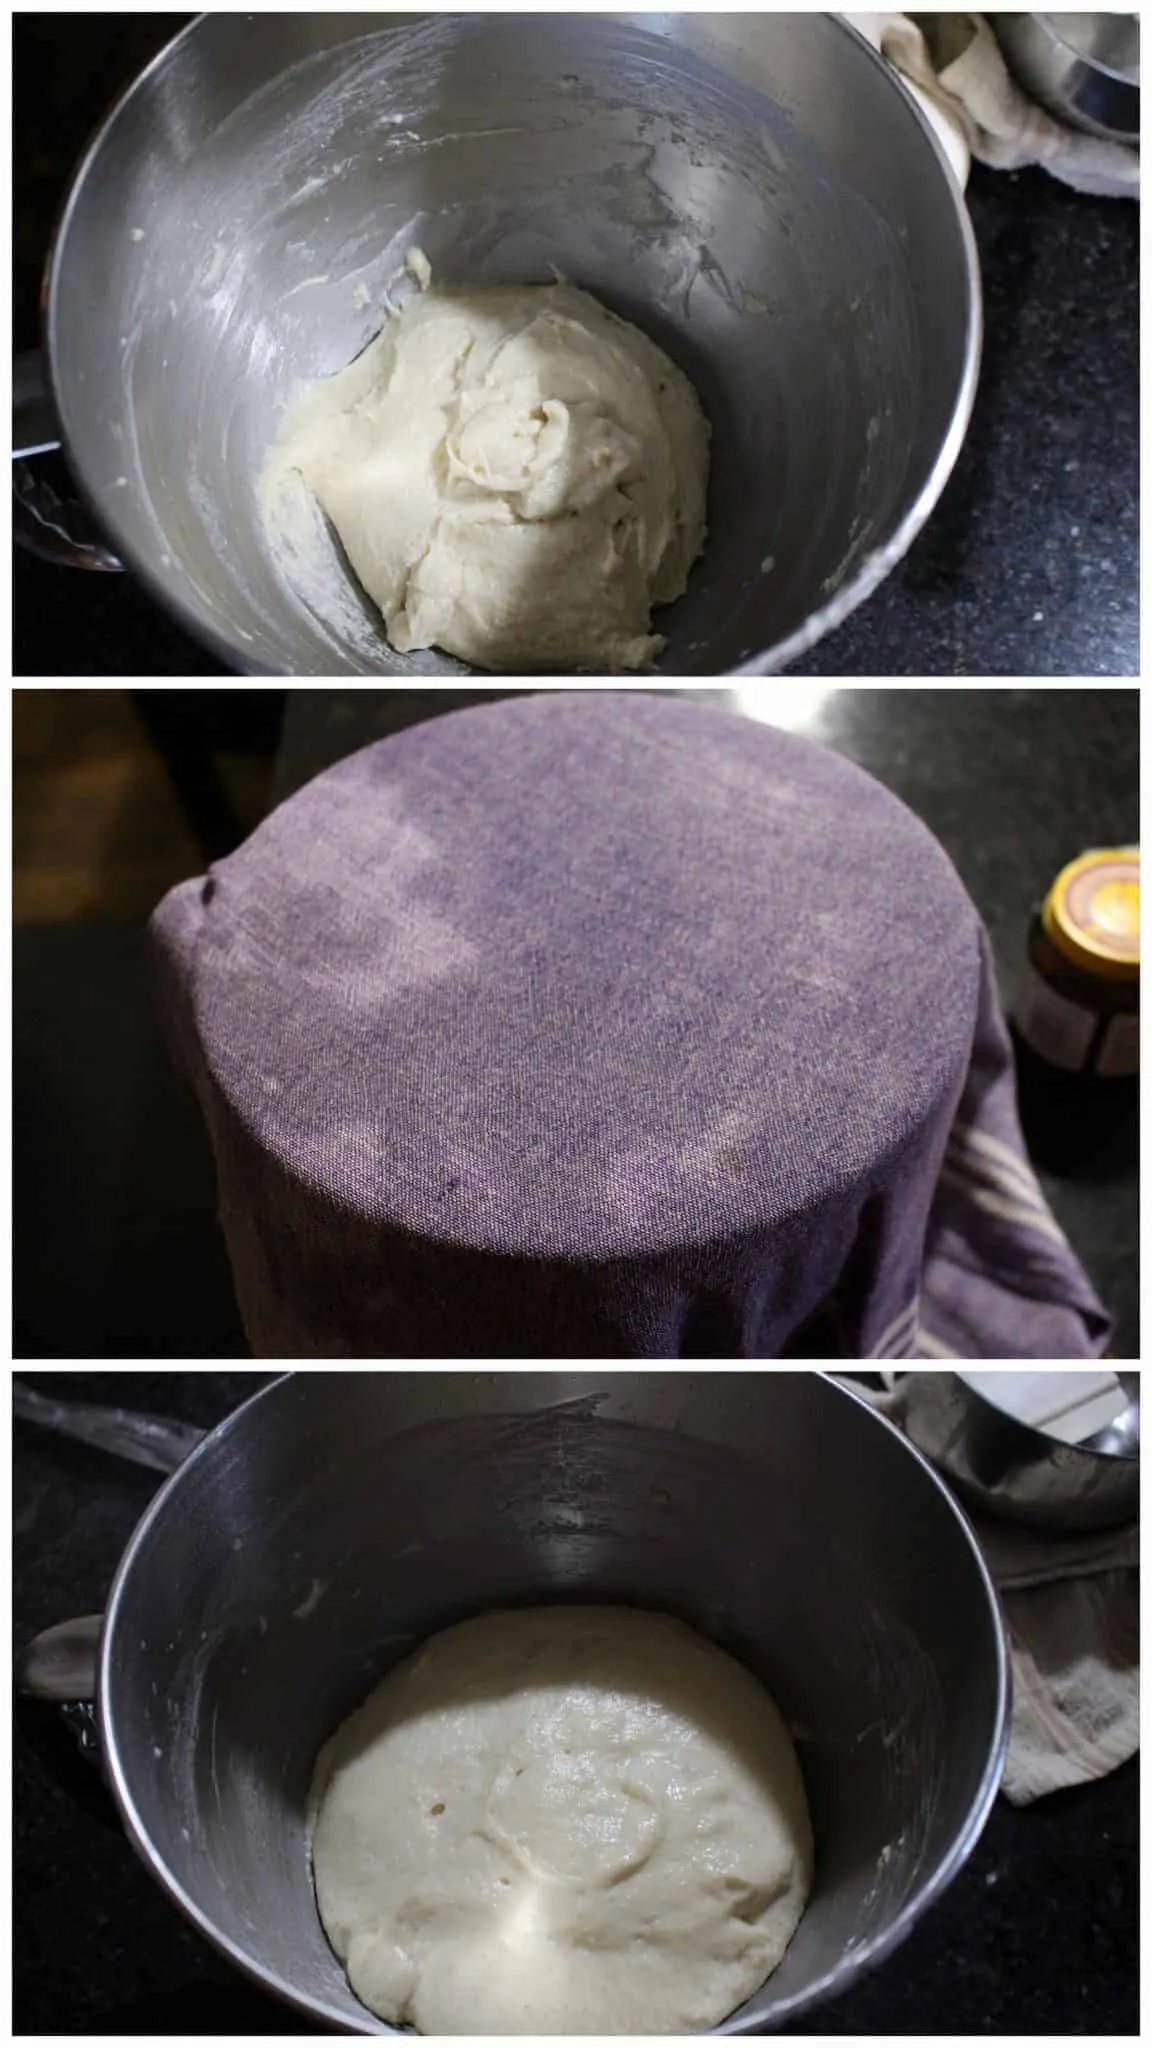 Making the dough in a bowl and resting it to proof